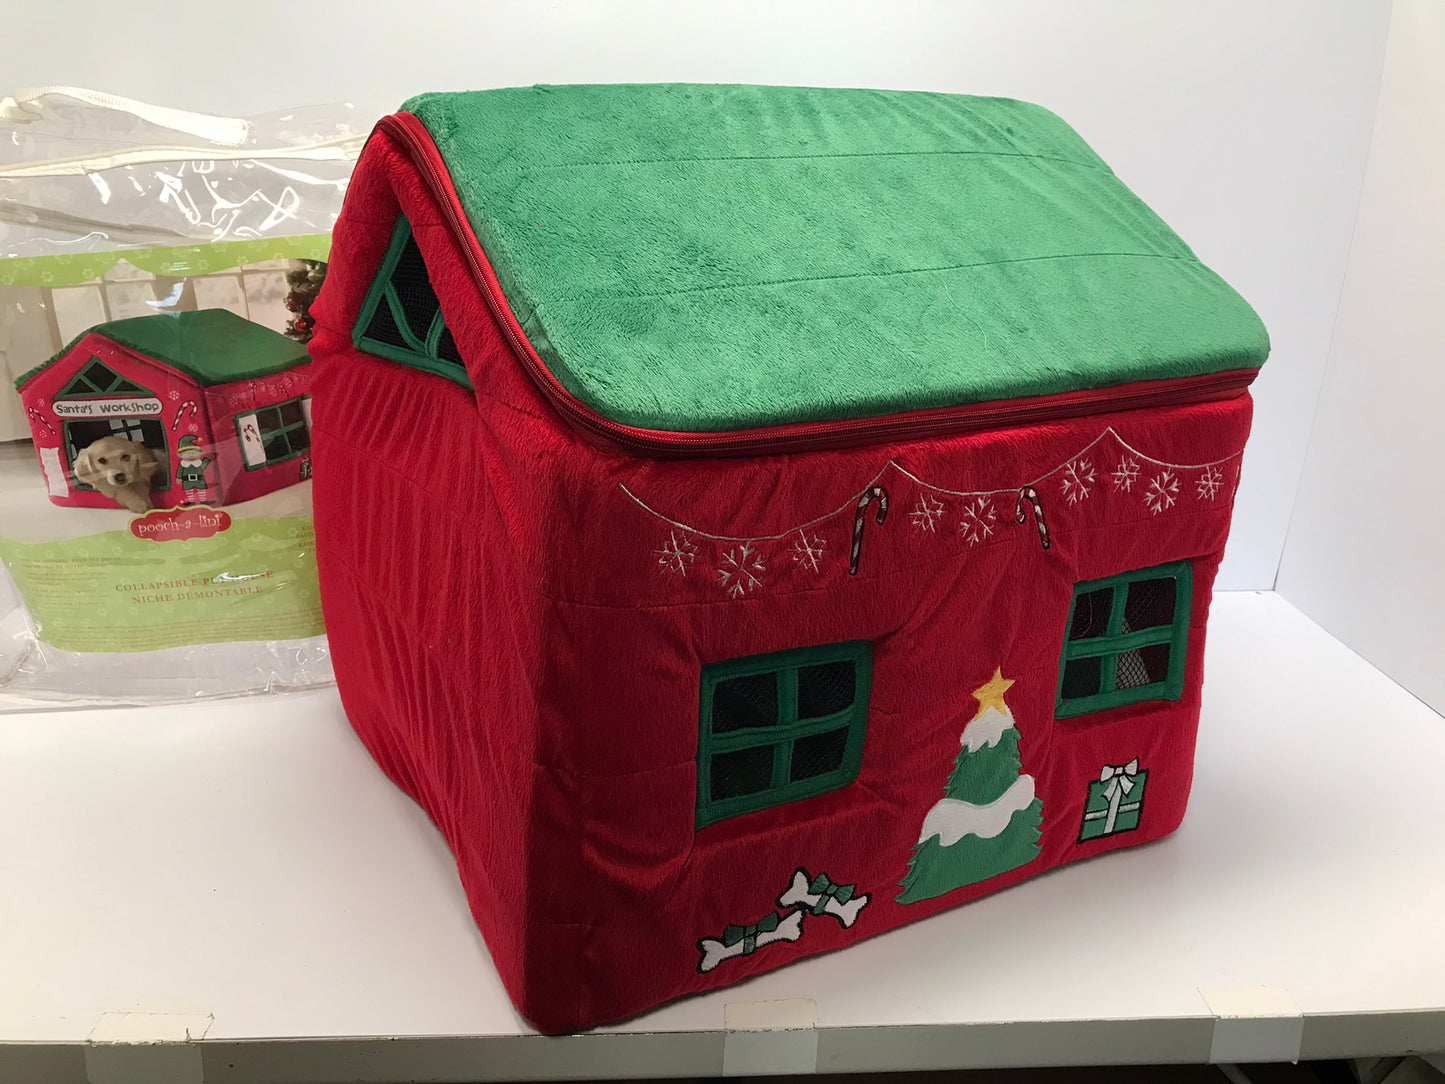 Christmas Pooch A Lini Collapsible Pet House Santa's Workshop 19.6x18.5x18.75 Inches Fits Small Dogs Under 15lbs Puppies Or Cats Used Once Like New